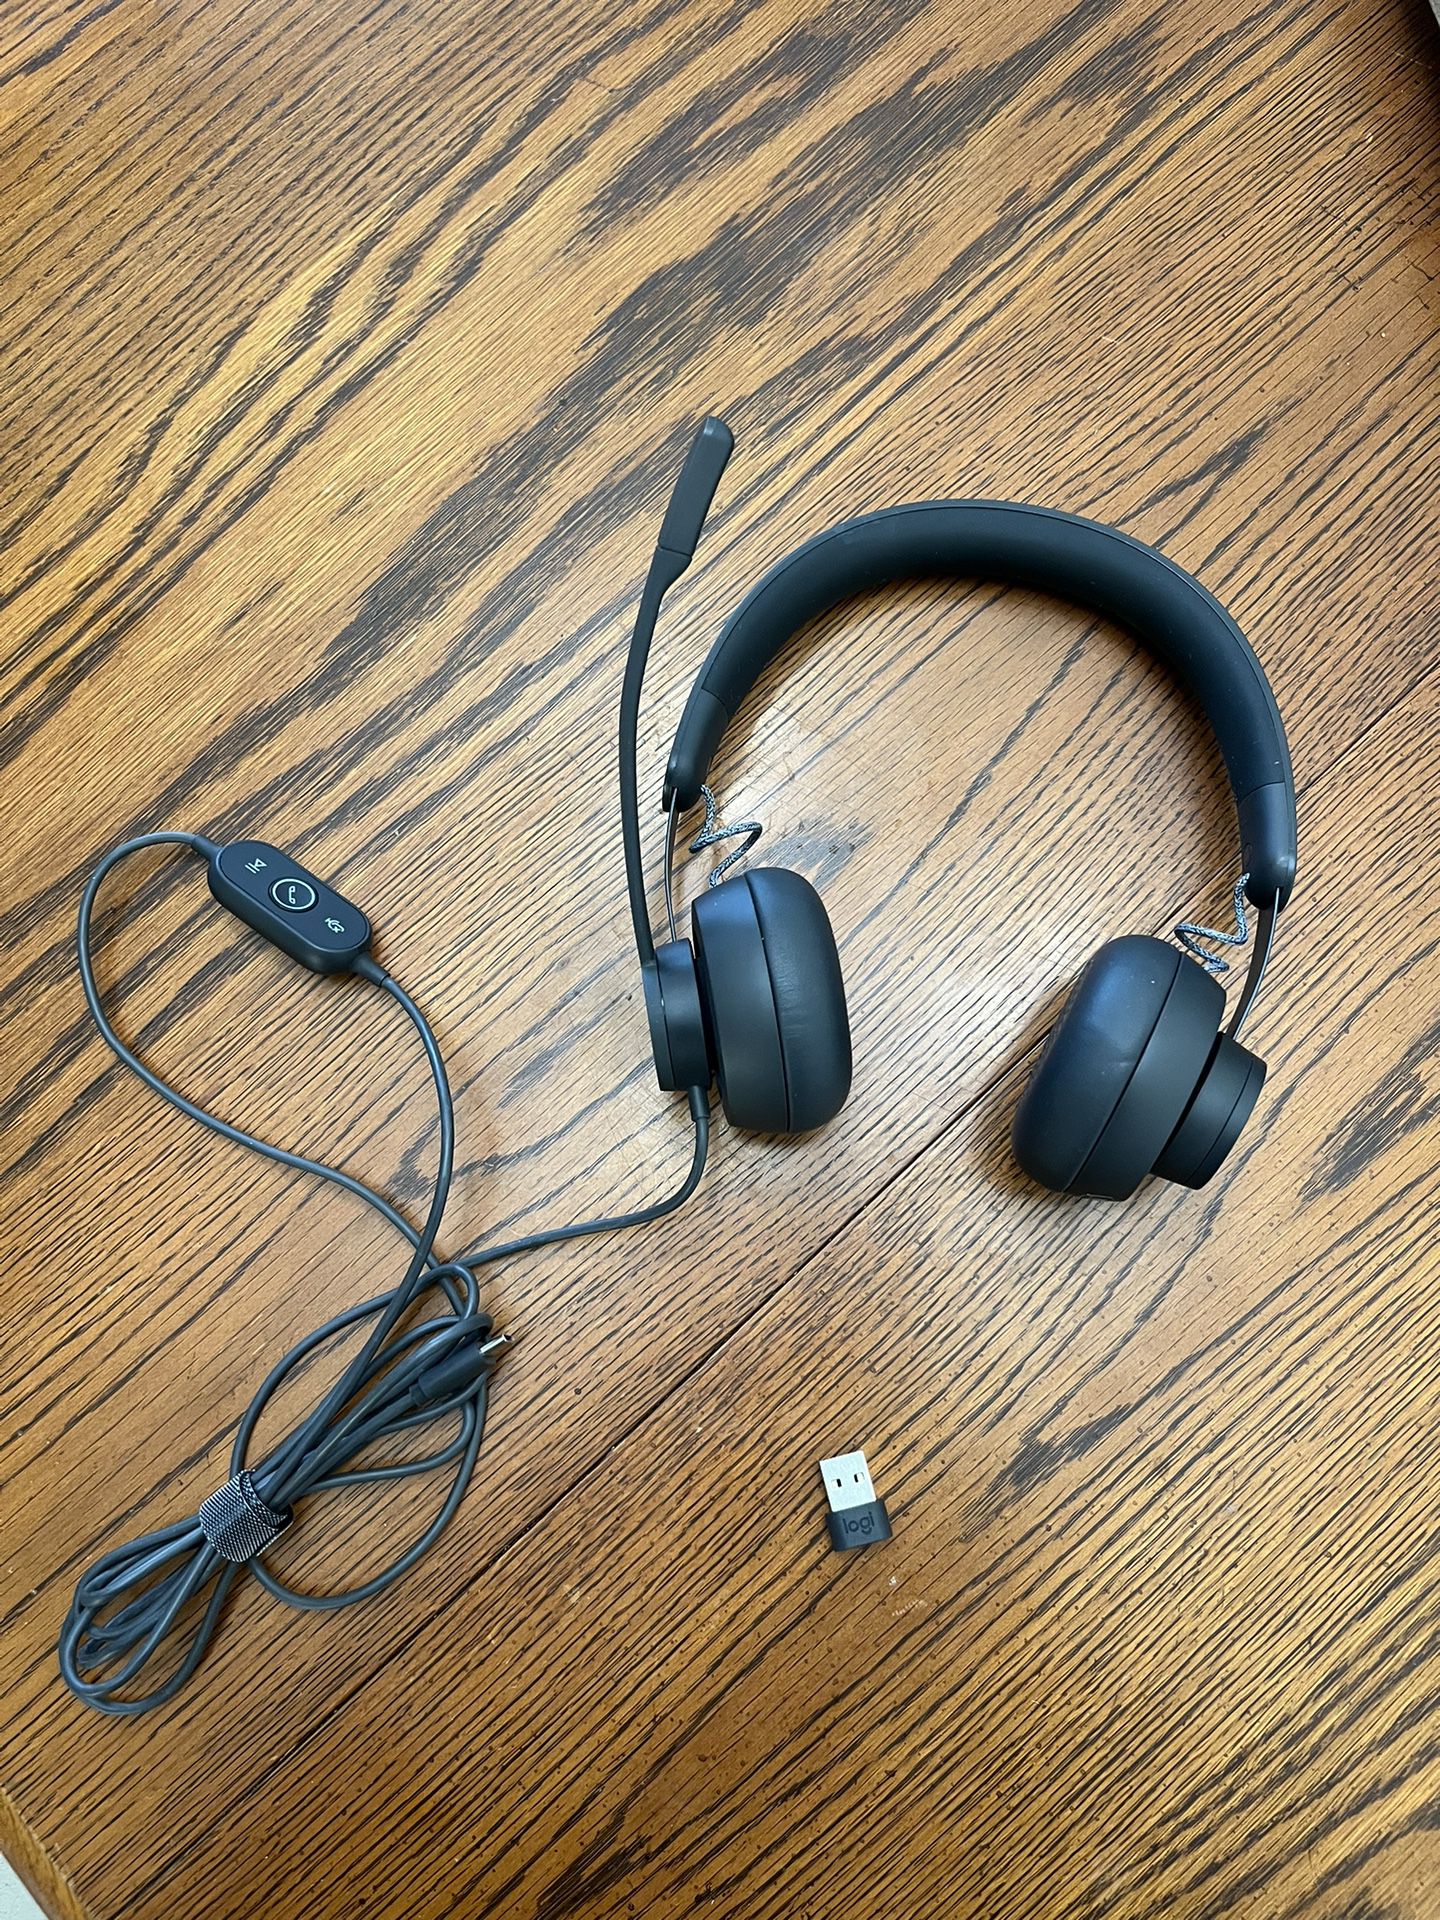 Logitech Zone 750 Wired Noise Canceling Headset